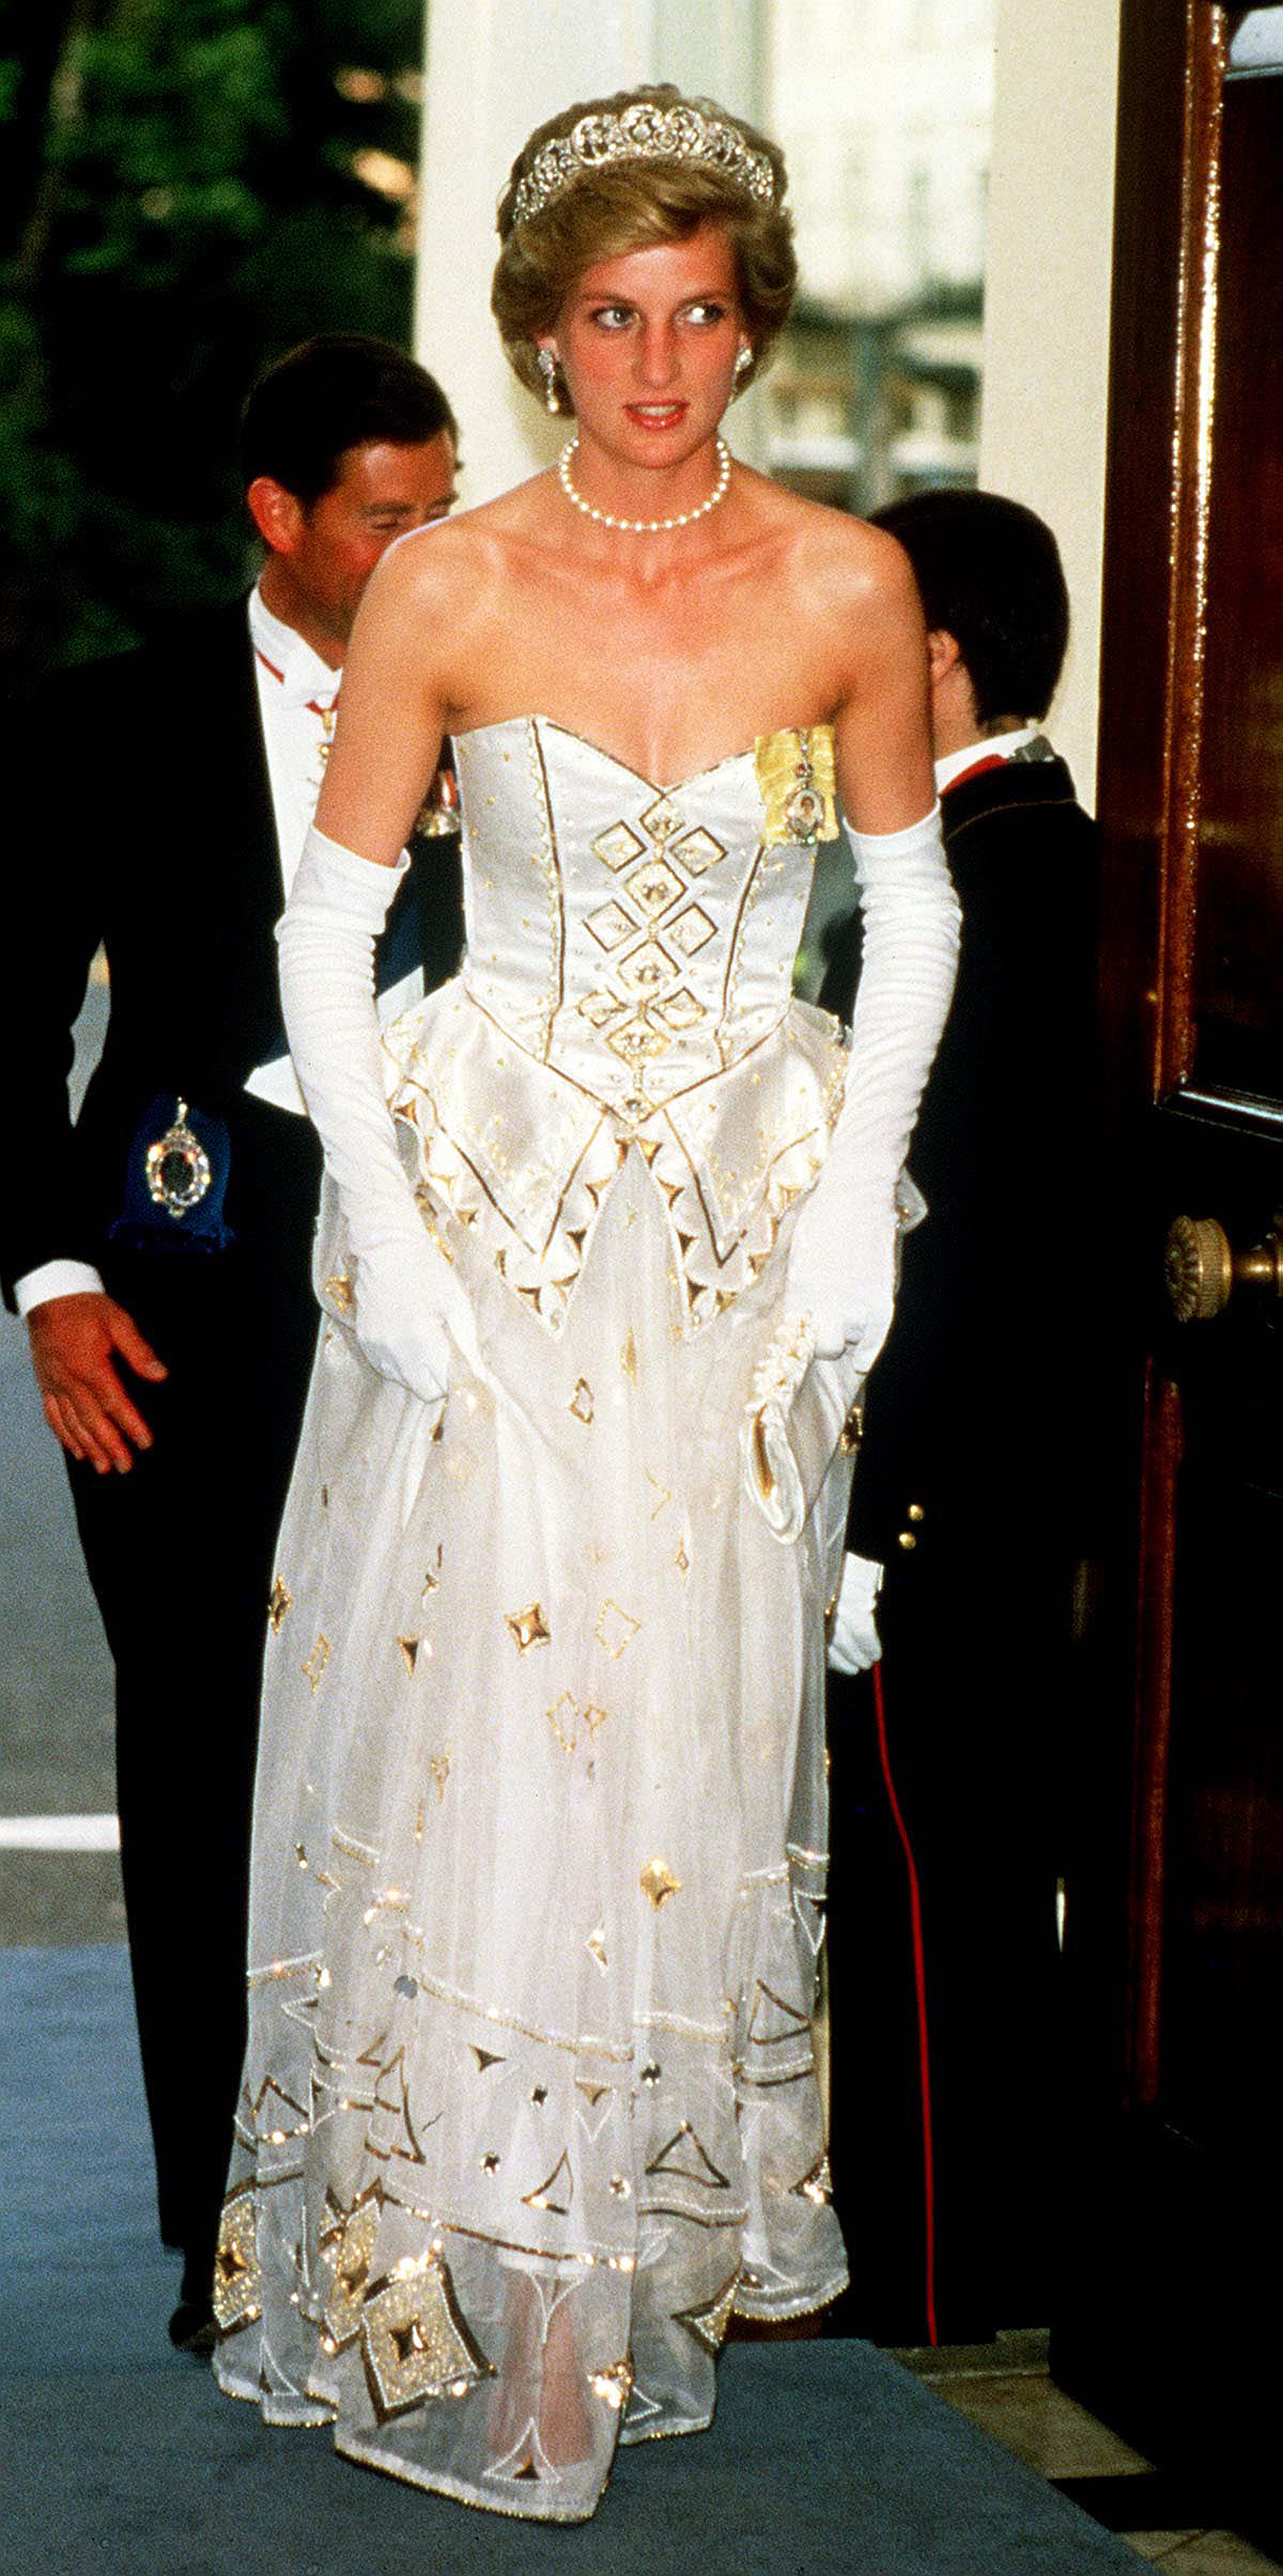 25 Iconic Outfits Worn by Princess Diana